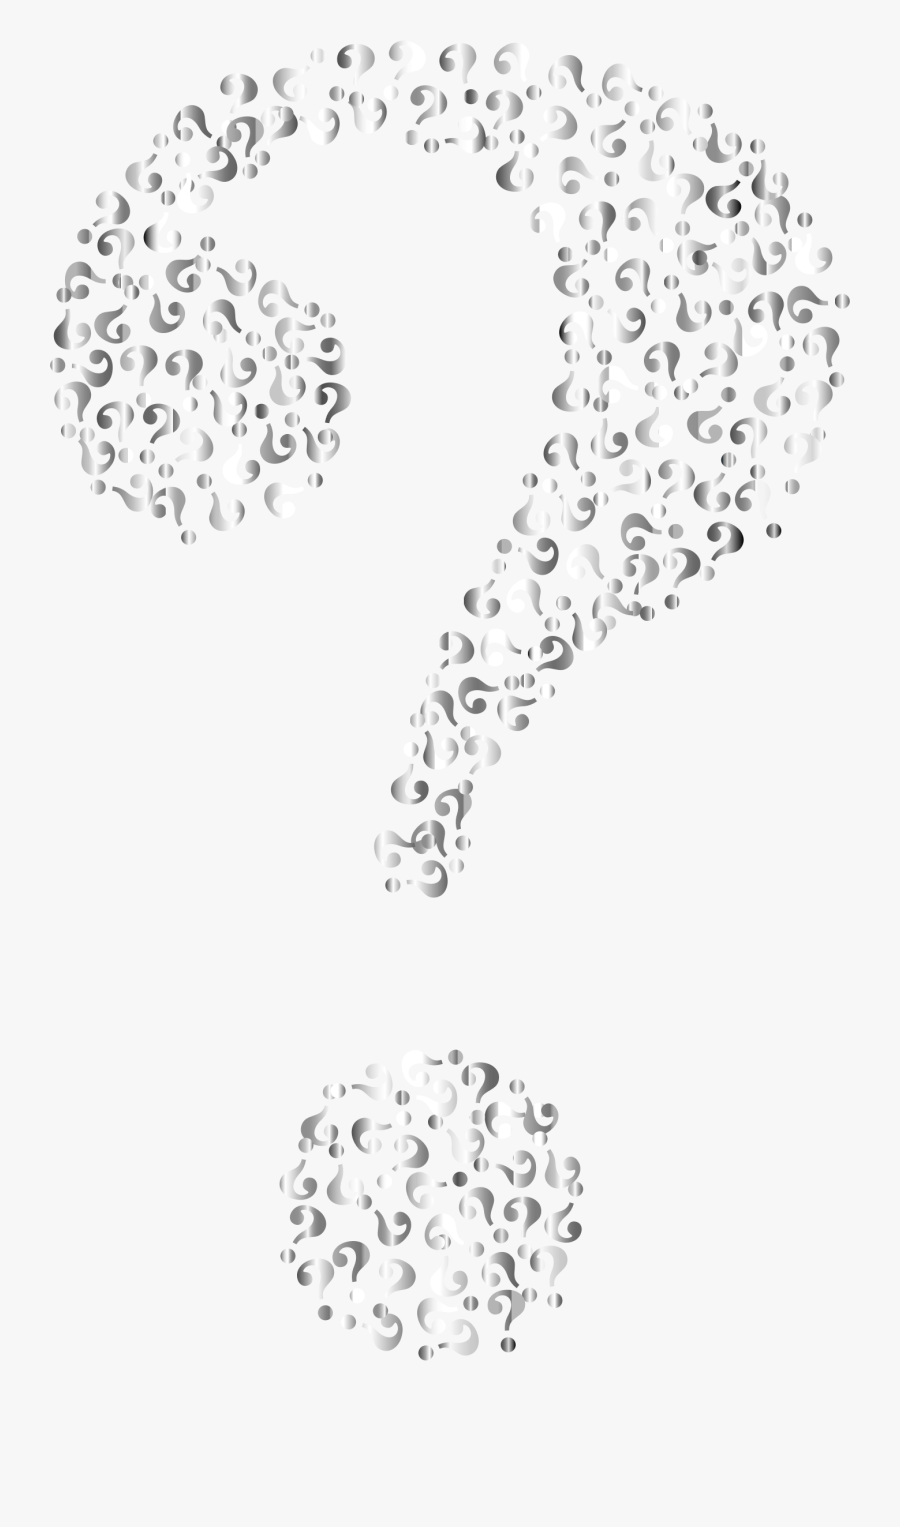 This Free Icons Png Design Of Prismatic Question Mark - Question Marks Clear Background, Transparent Clipart